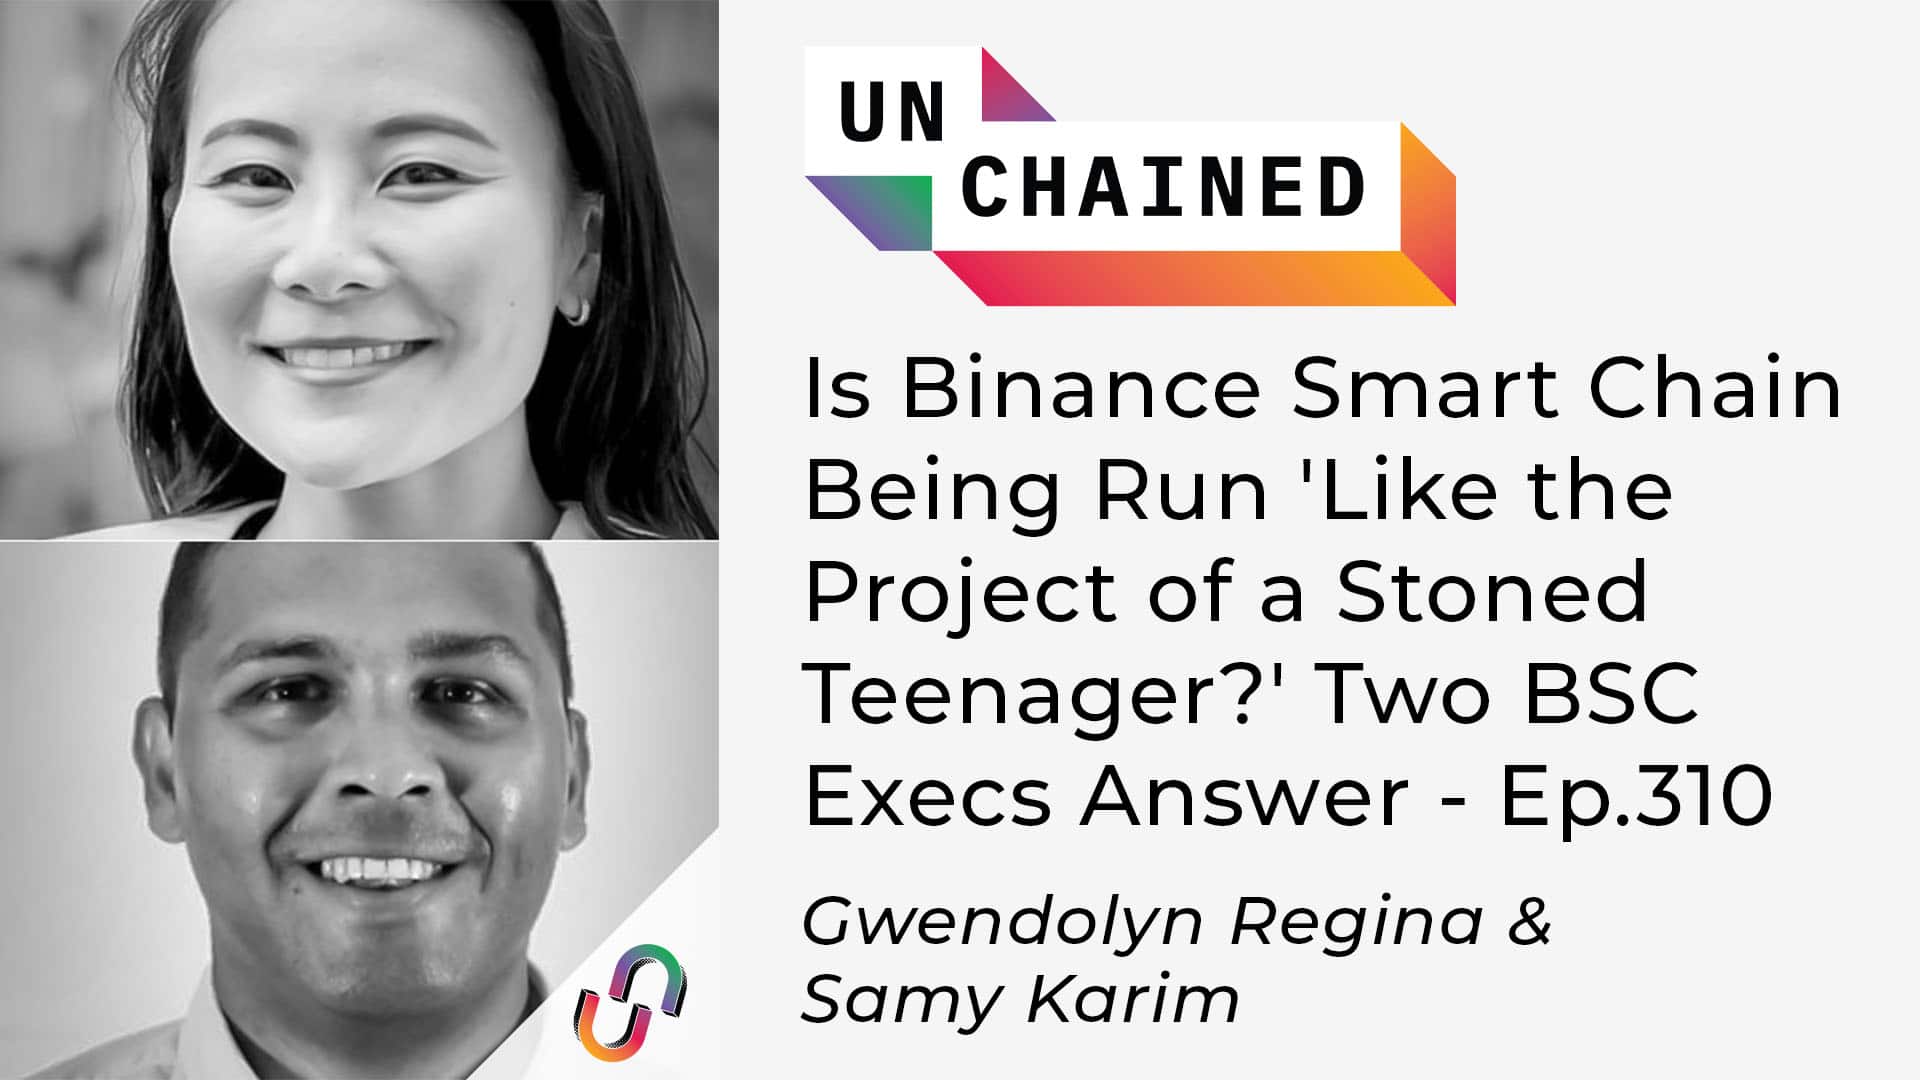 Is Binance Smart Chain Being Run ‘Like the Project of a Stoned Teenager?’ Two BSC Execs Answer